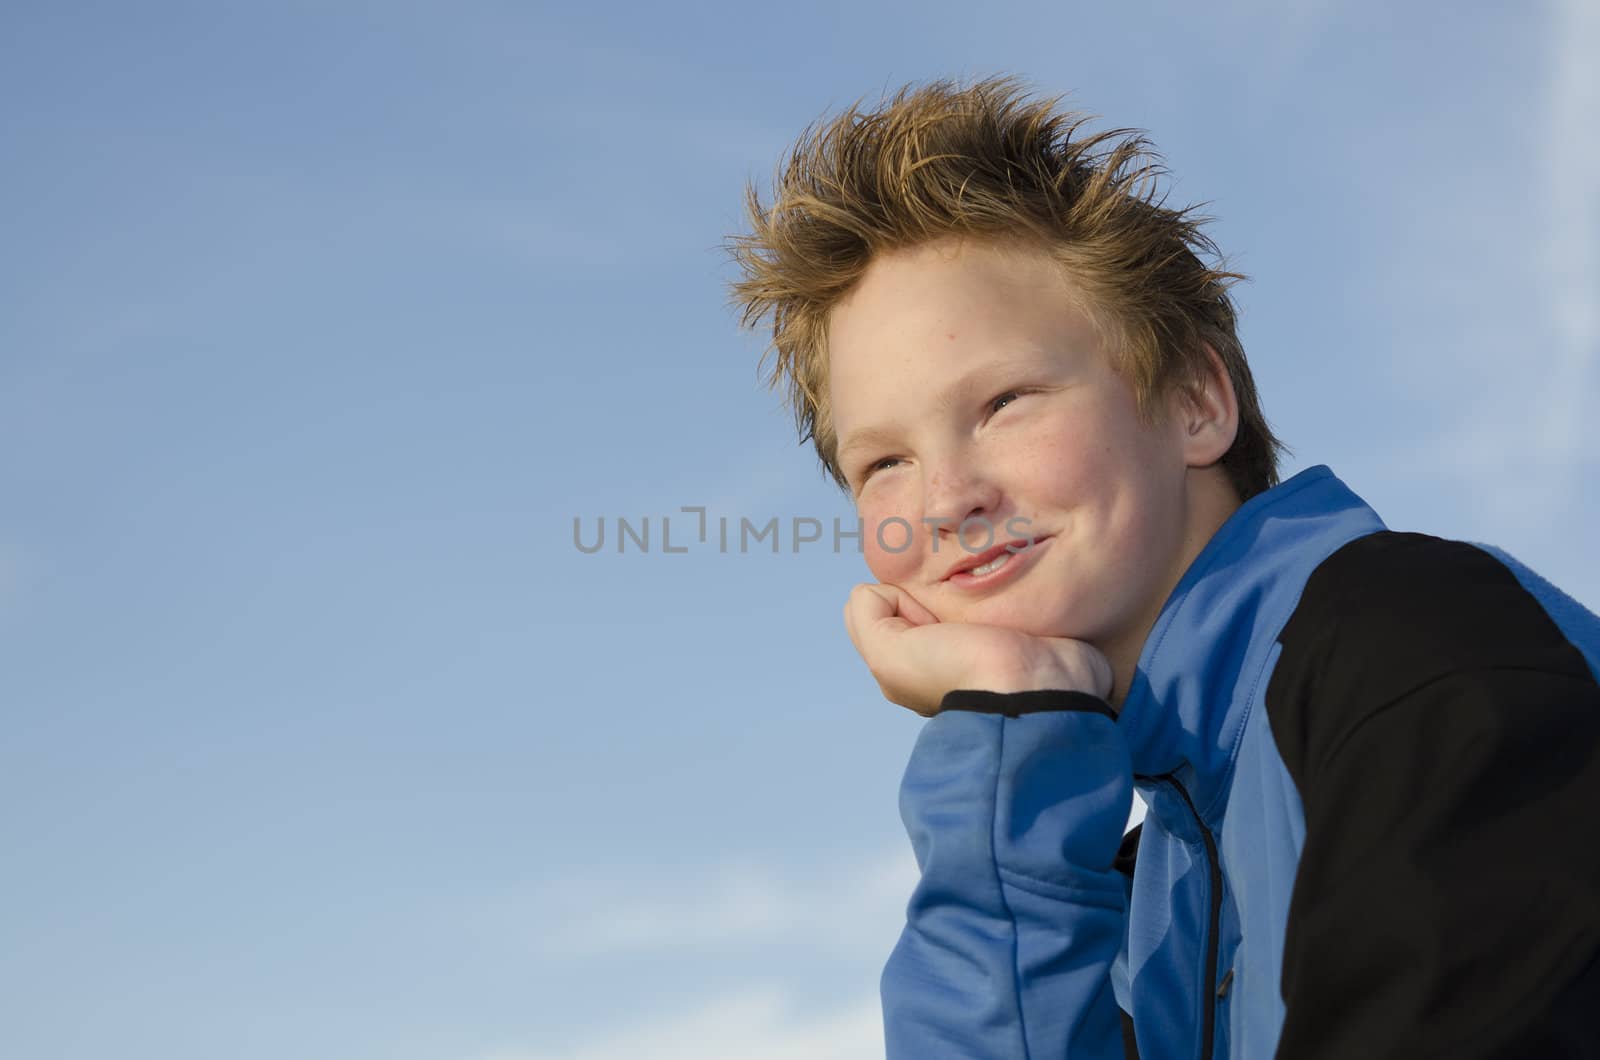 Pleased teen with spiky hairstyle against blue sky background